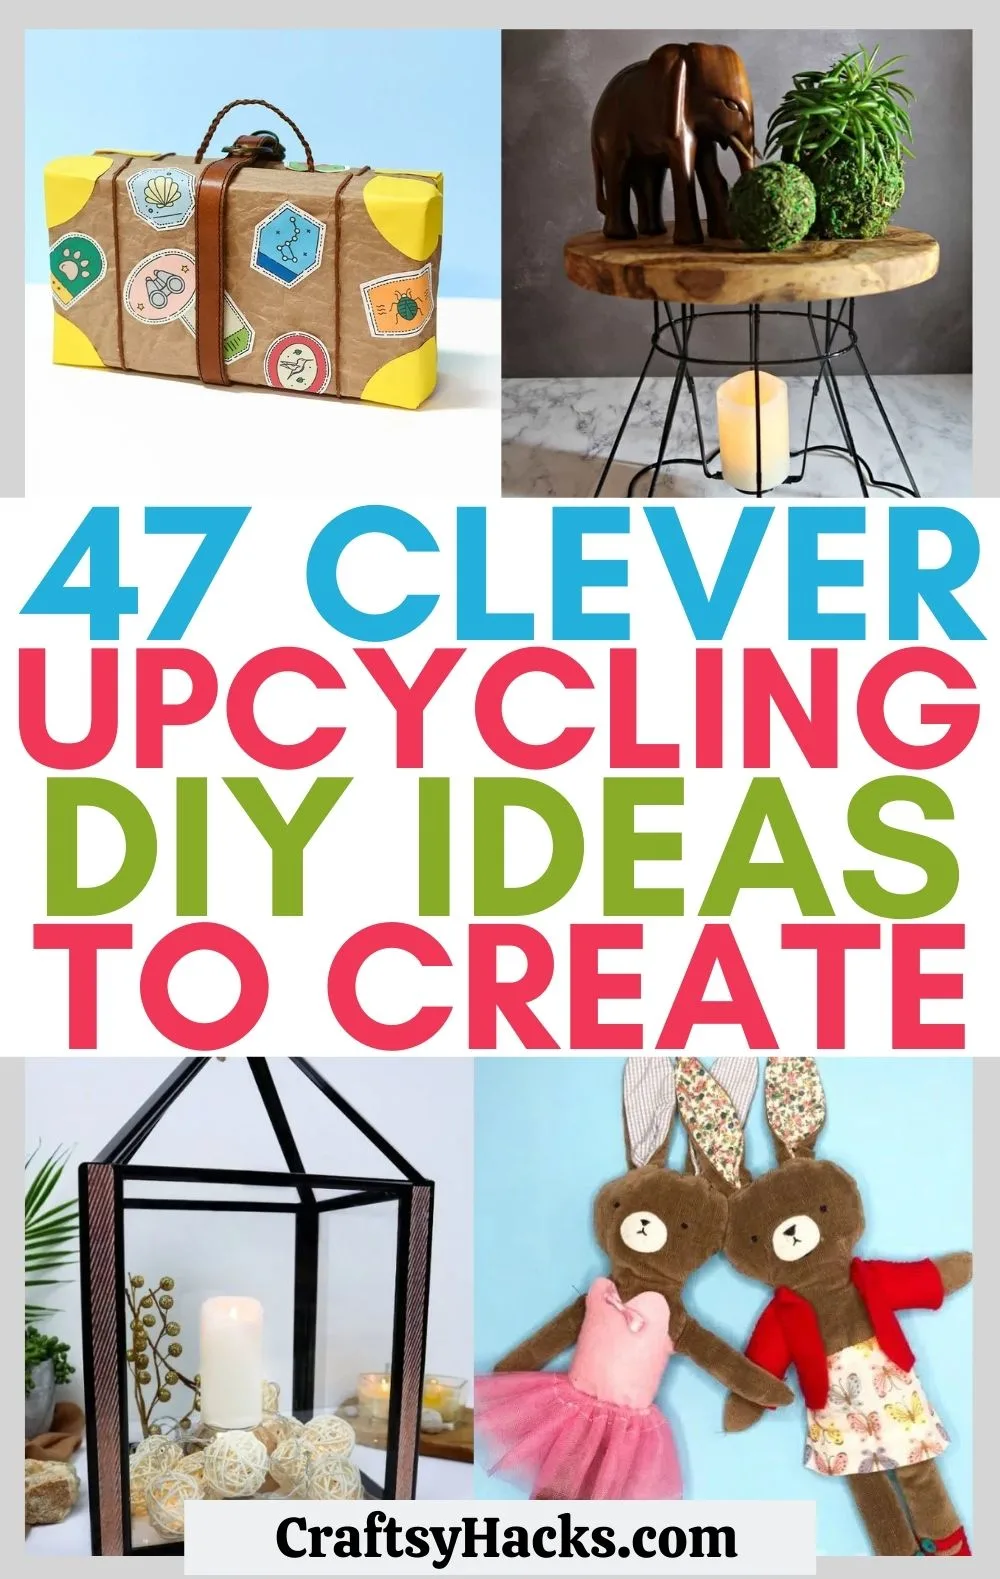 8 Delightful Upcycled Craft Projects For Adults - diy Thought